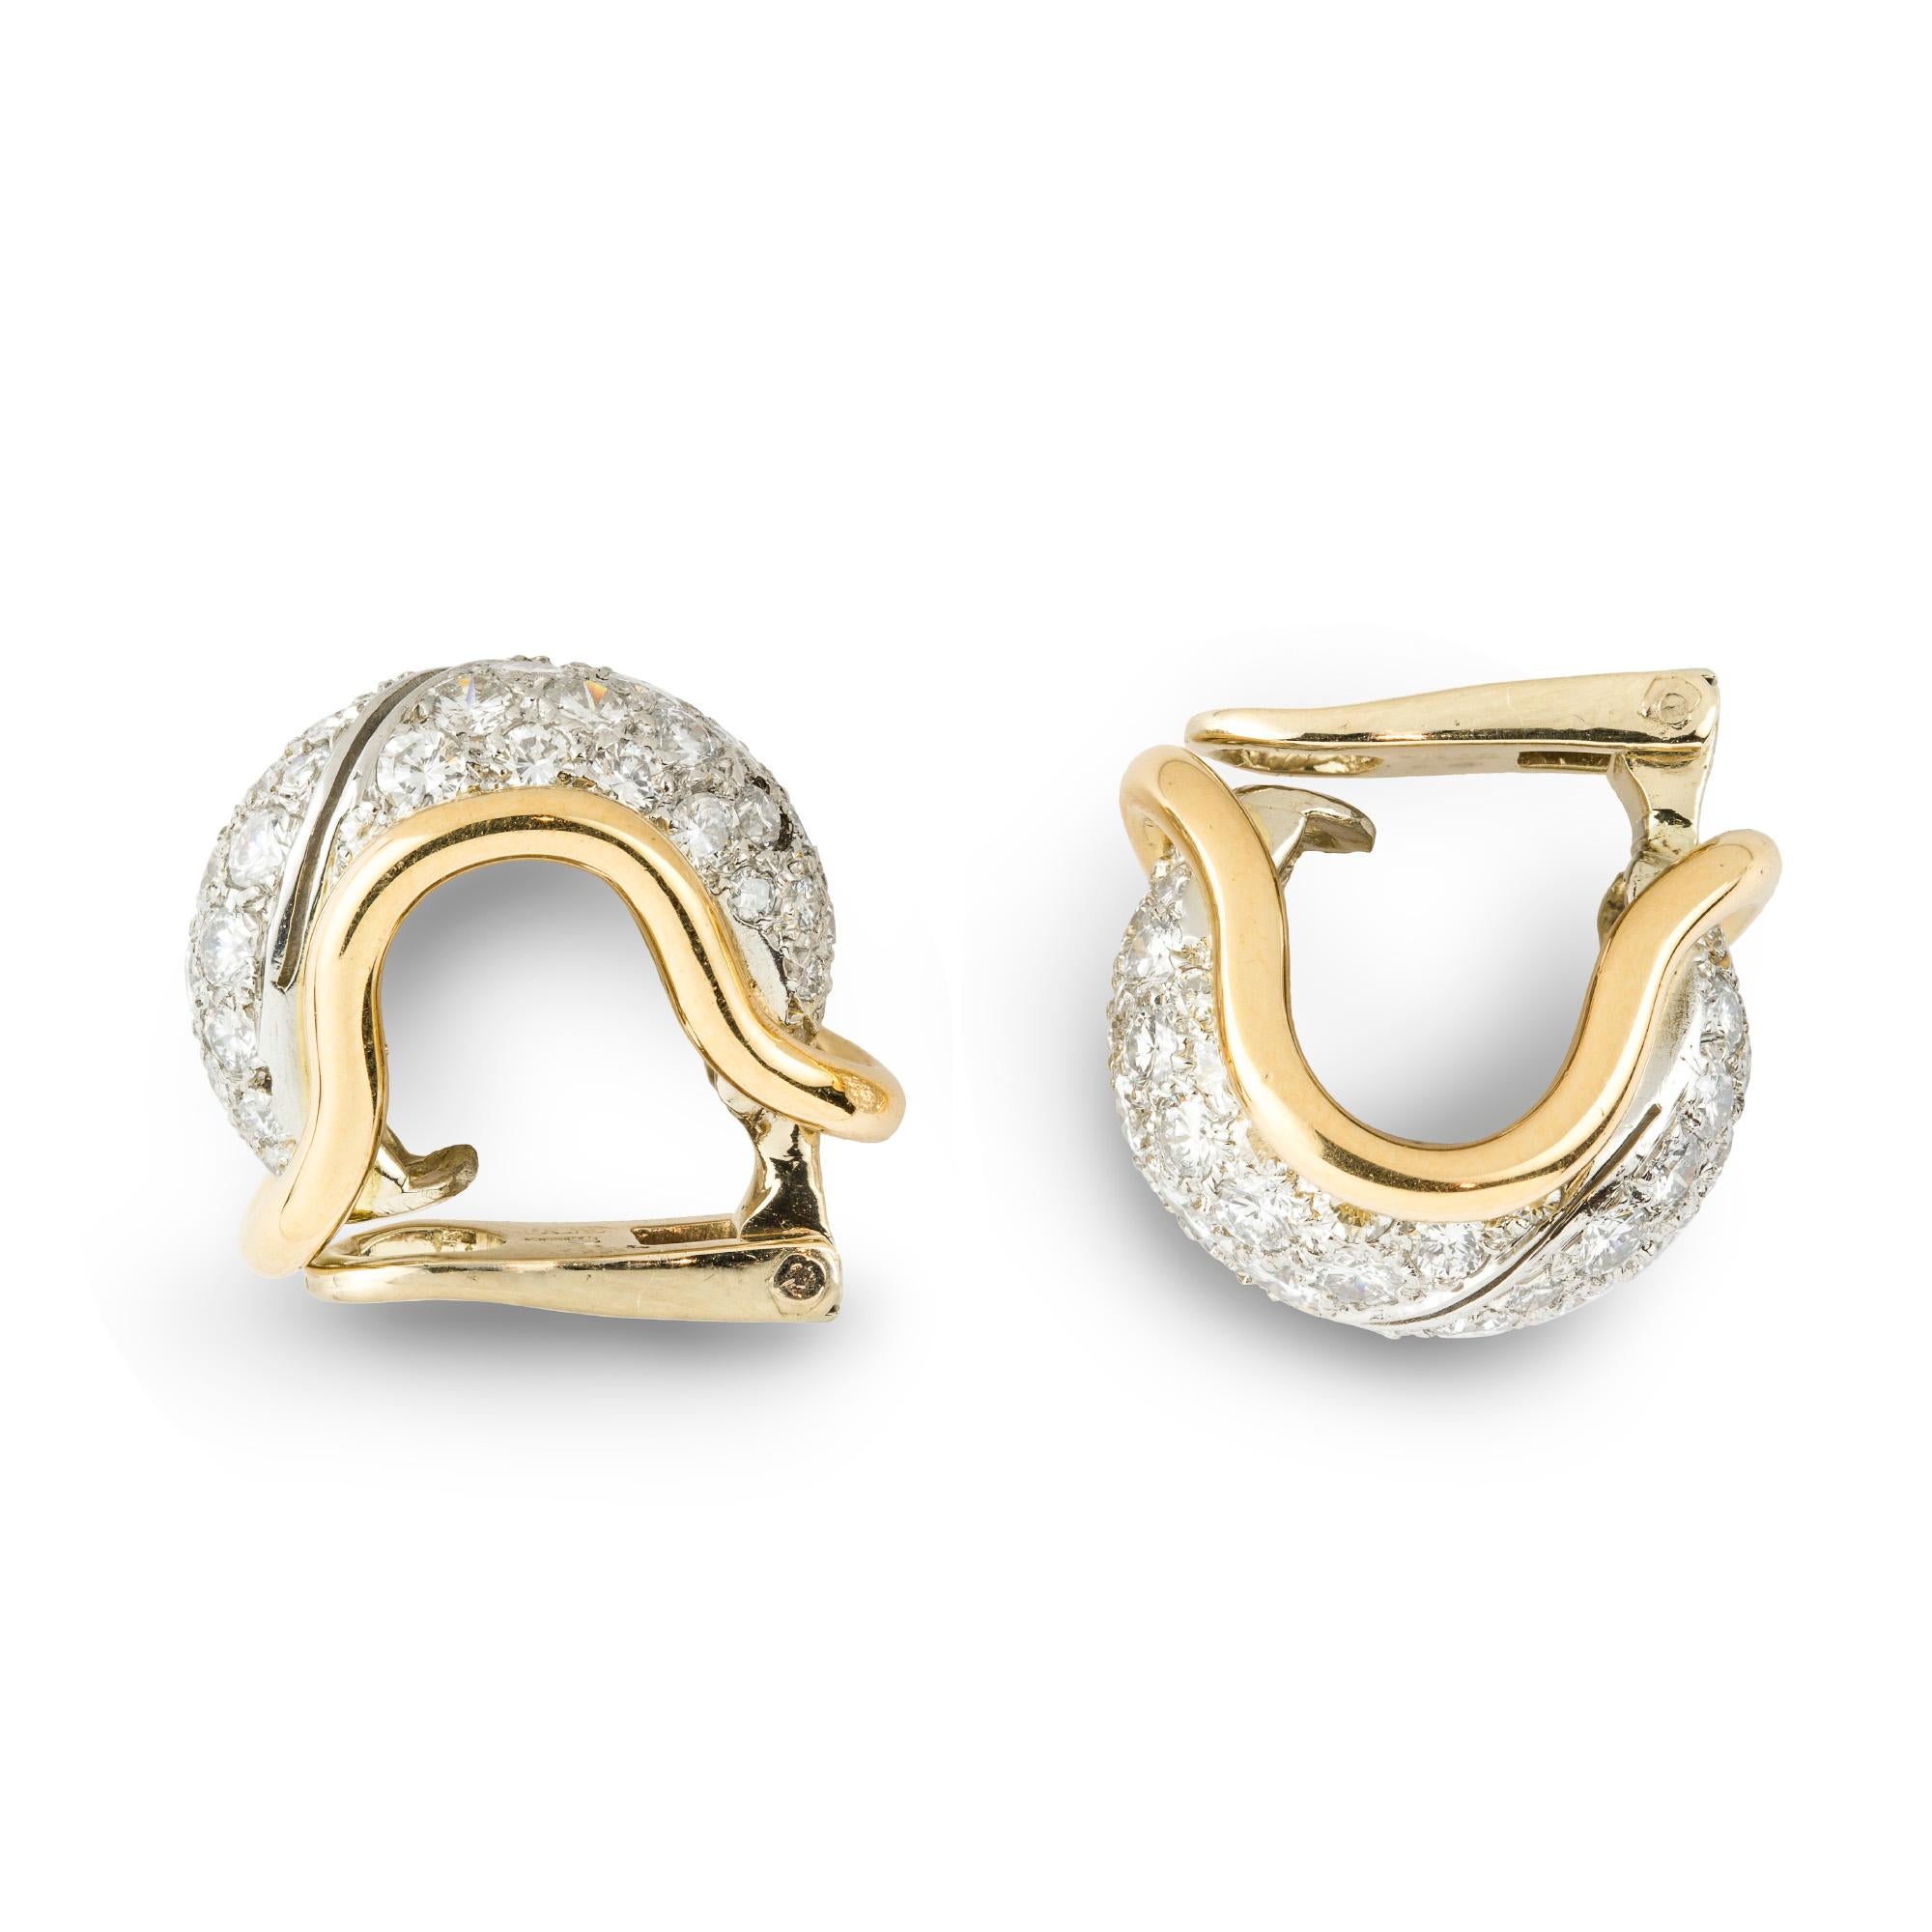 A pair of diamond hoop clip earrings, each earring comprising of a pavé-set diamond centre, estimated to weigh a total of 2.2 carats for the pair, with a pierced diagonal stripe and a yellow gold border, all to a white gold mount with clip fittings,